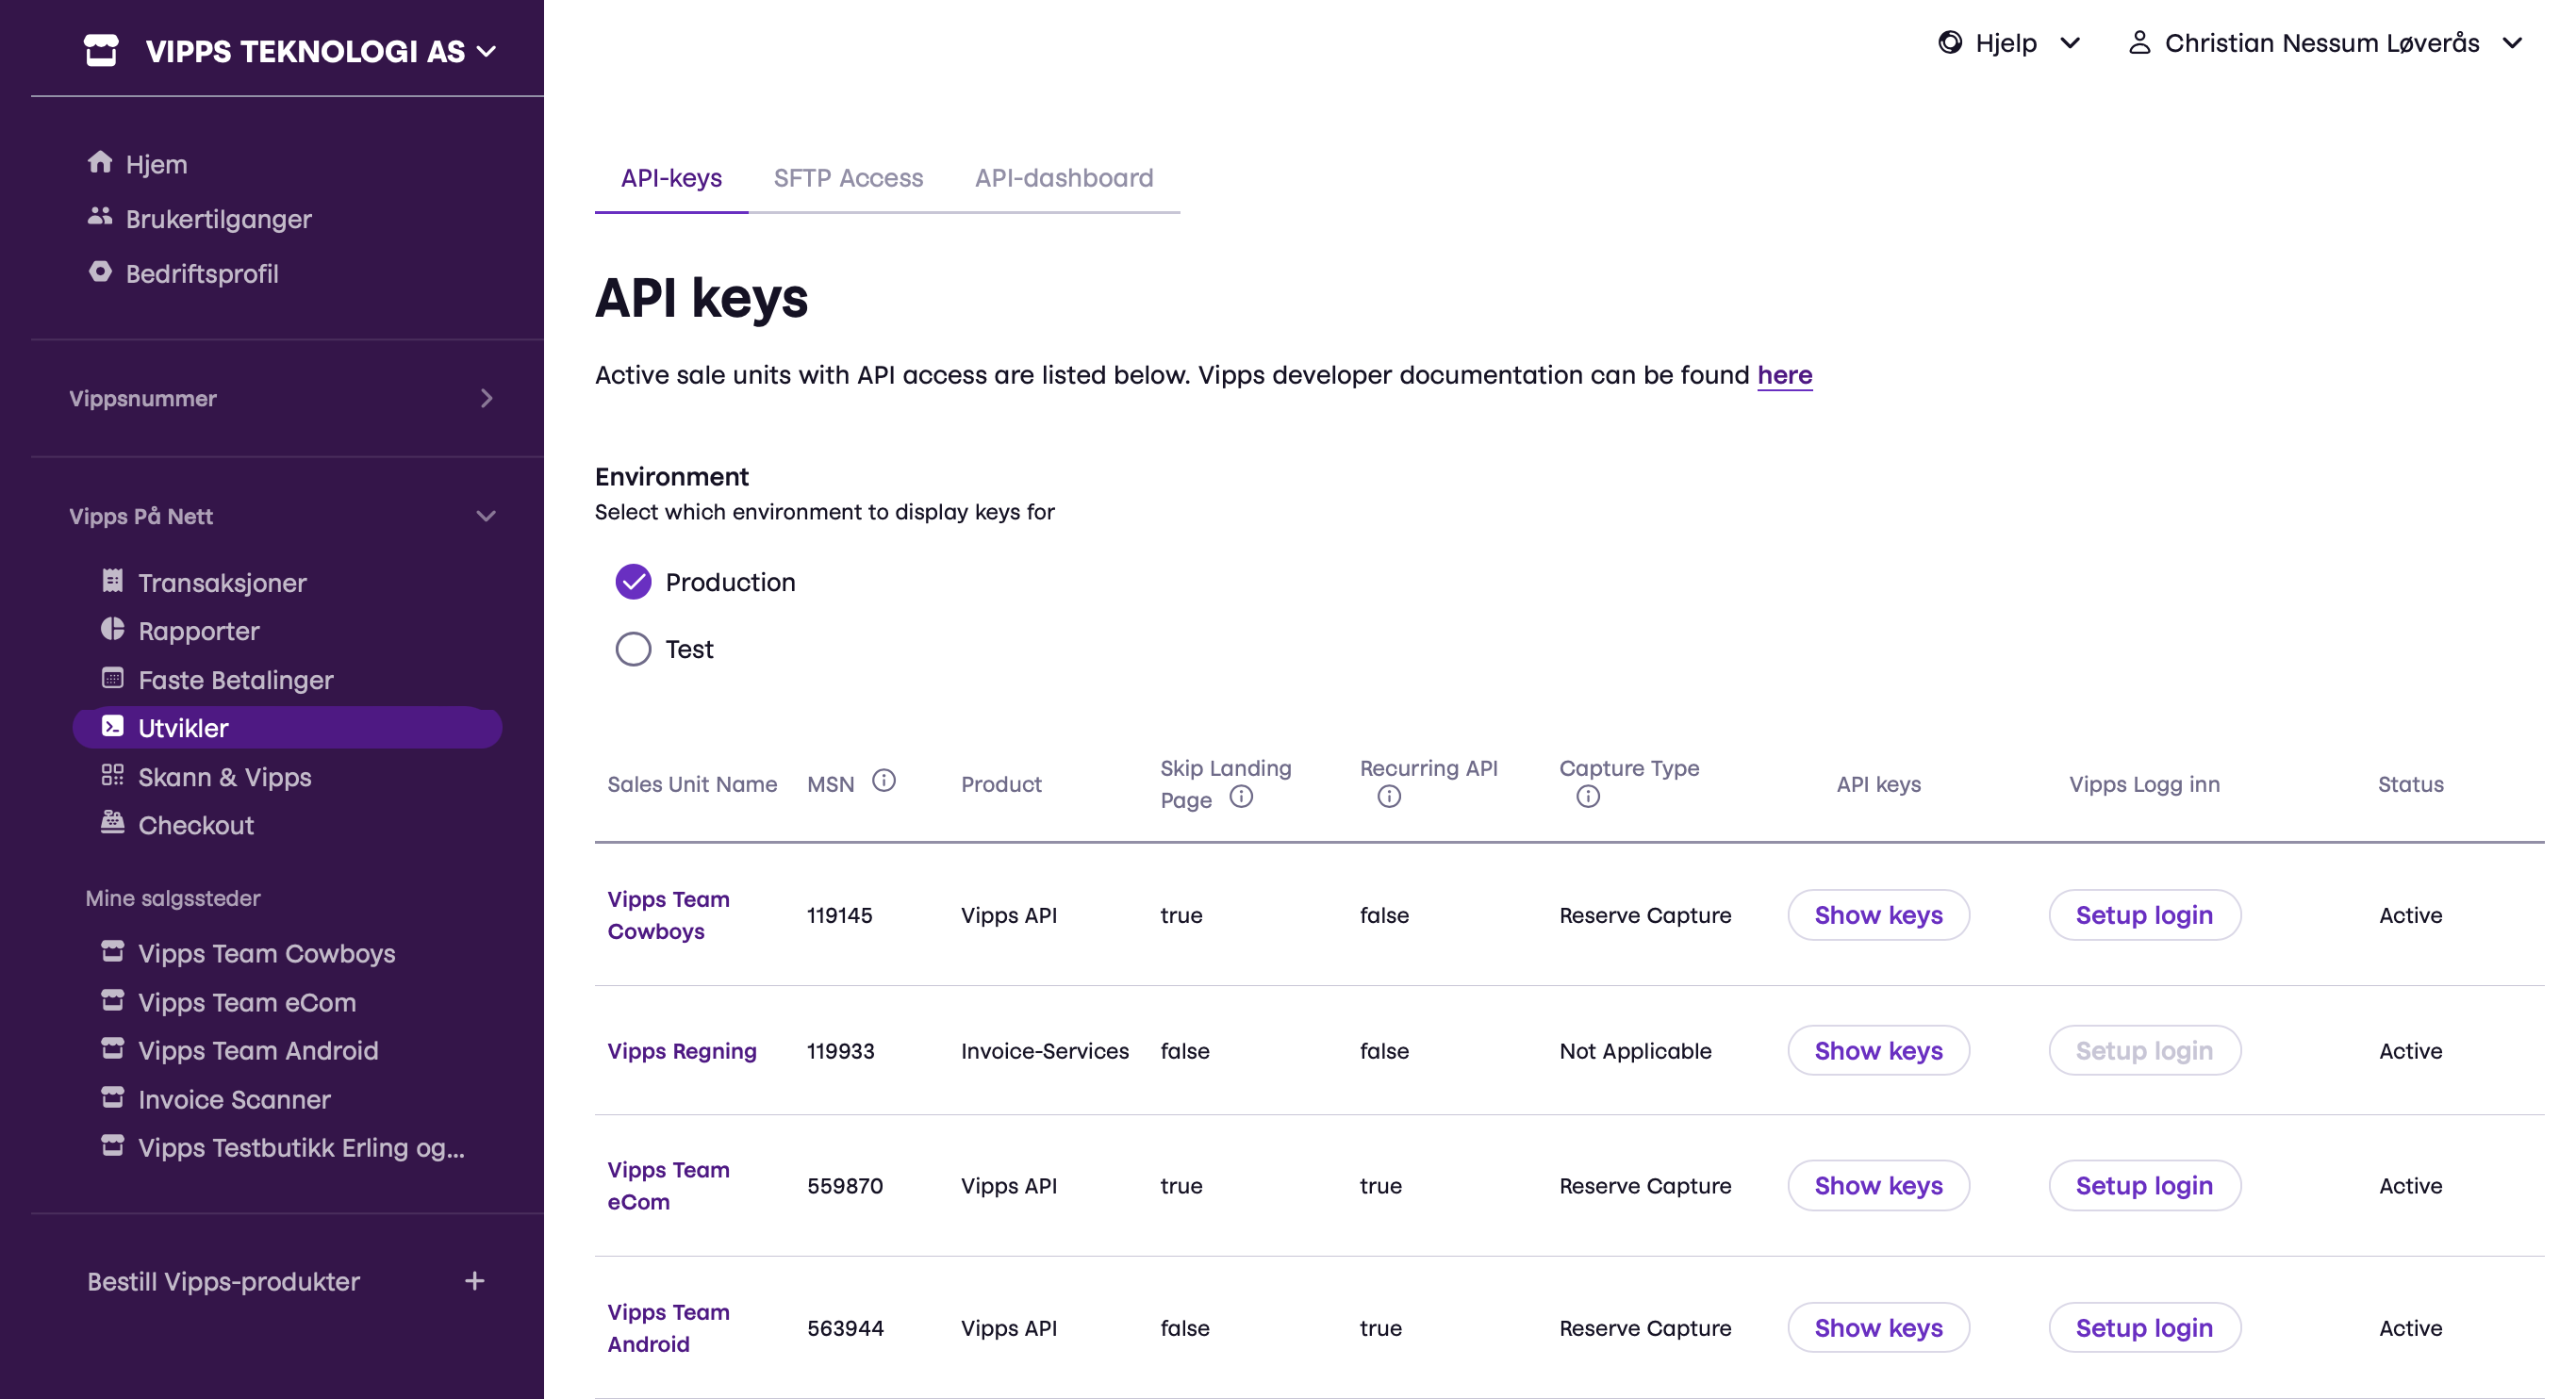 portal.vipps.no: The API products for a sales unit